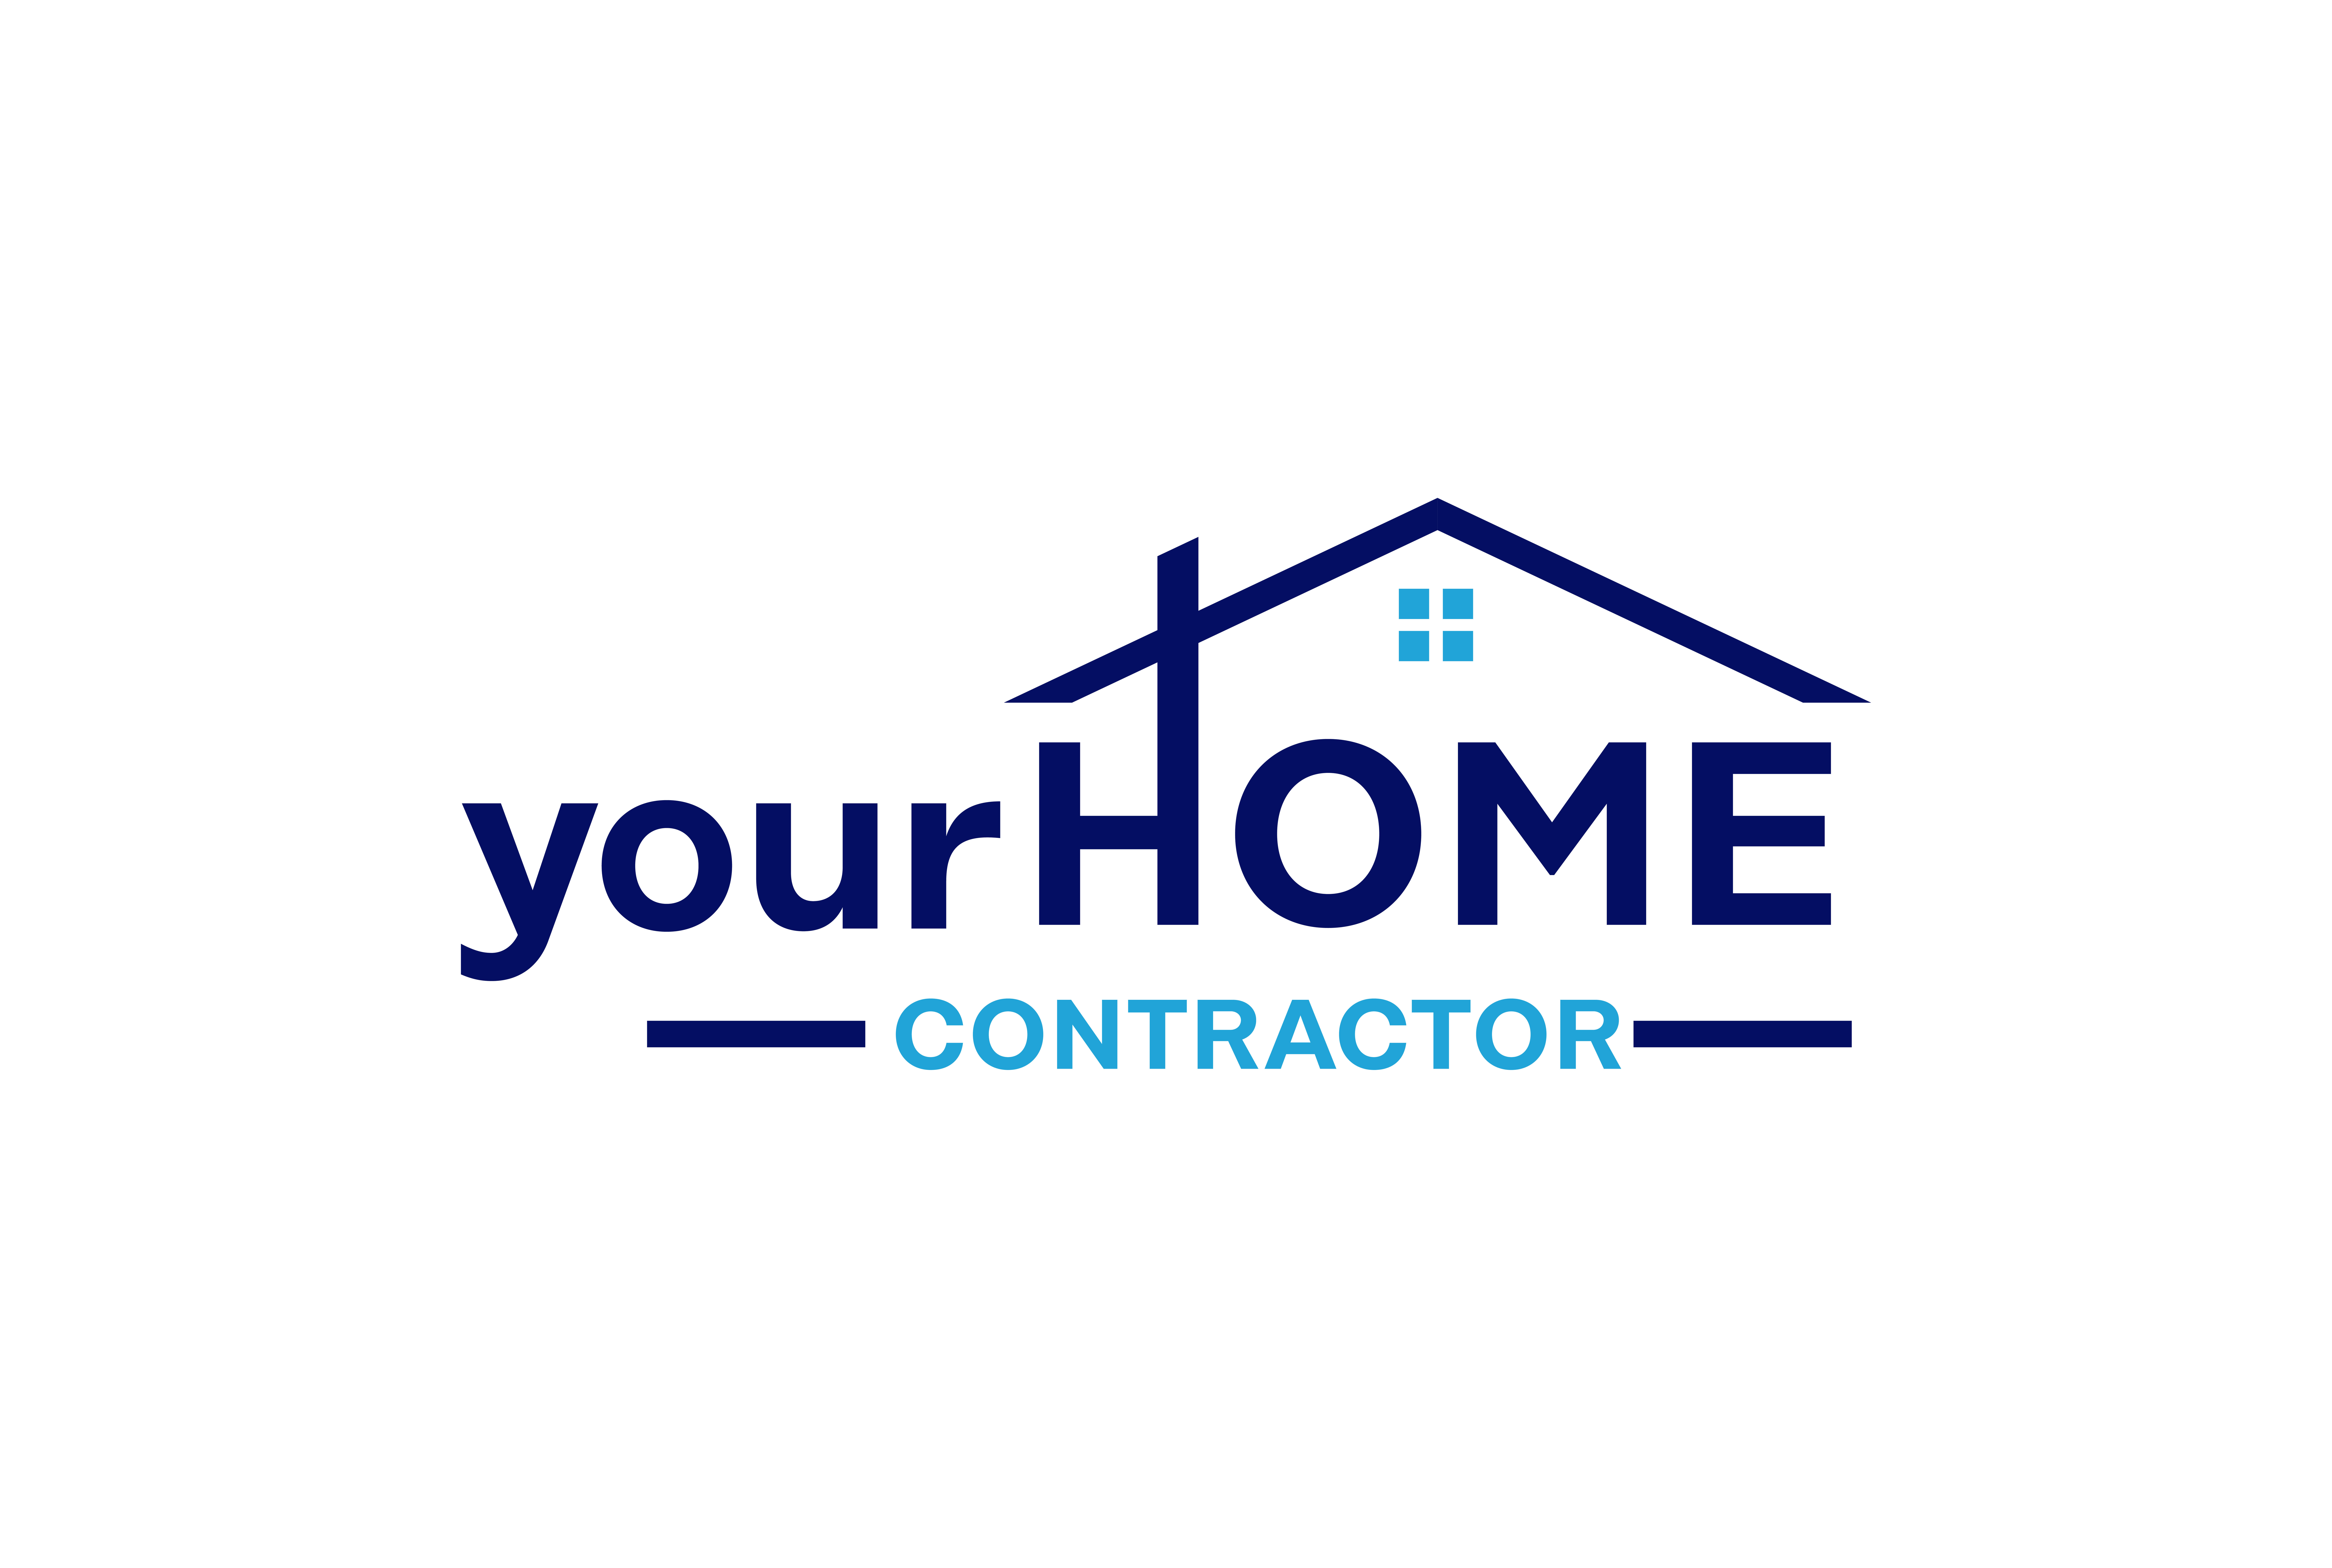 Your Home Contractor